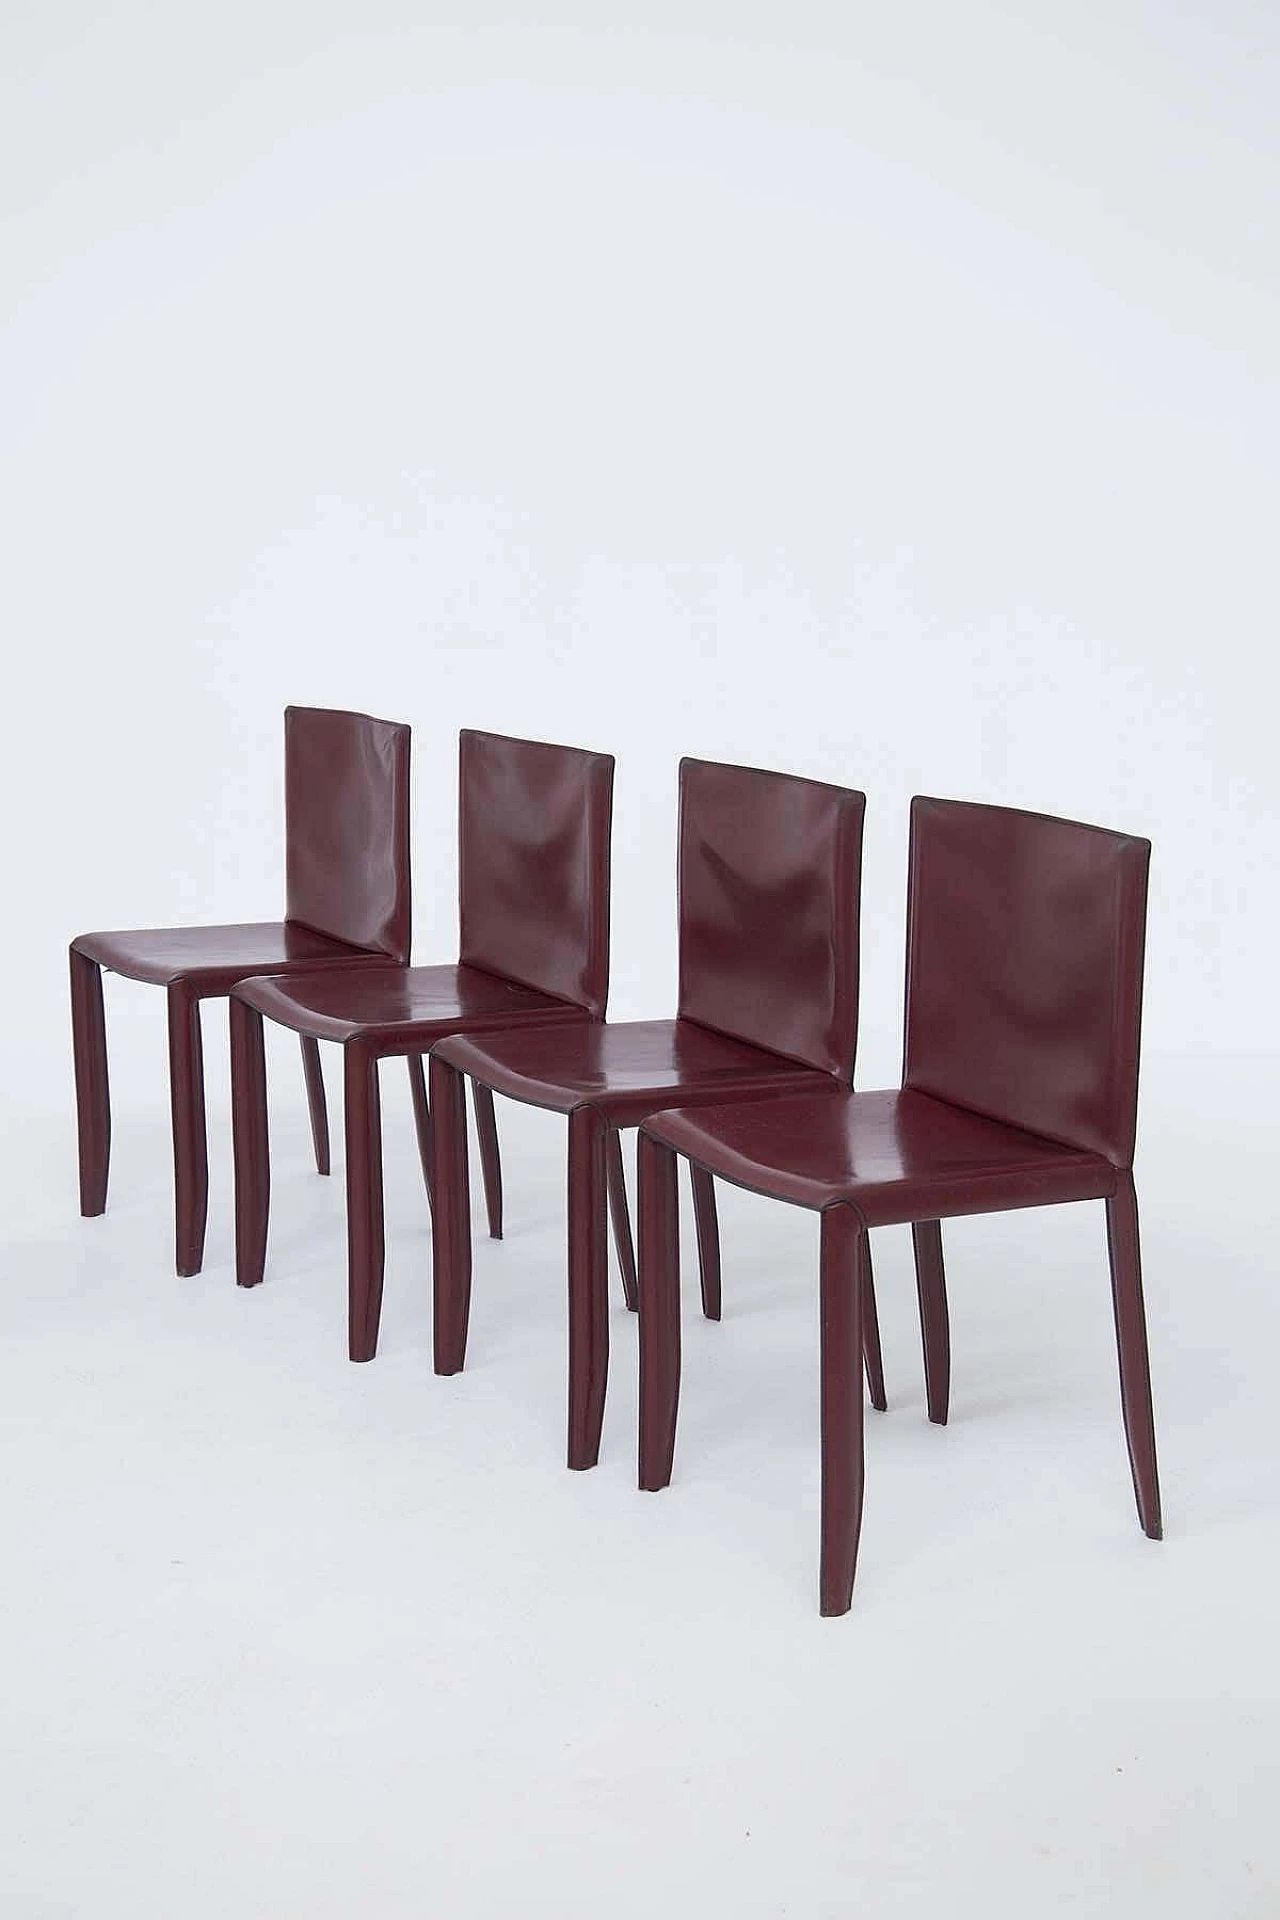 6 burgundy leather table chairs with visible stitching for Cattelan Italia, 1980s 1380233